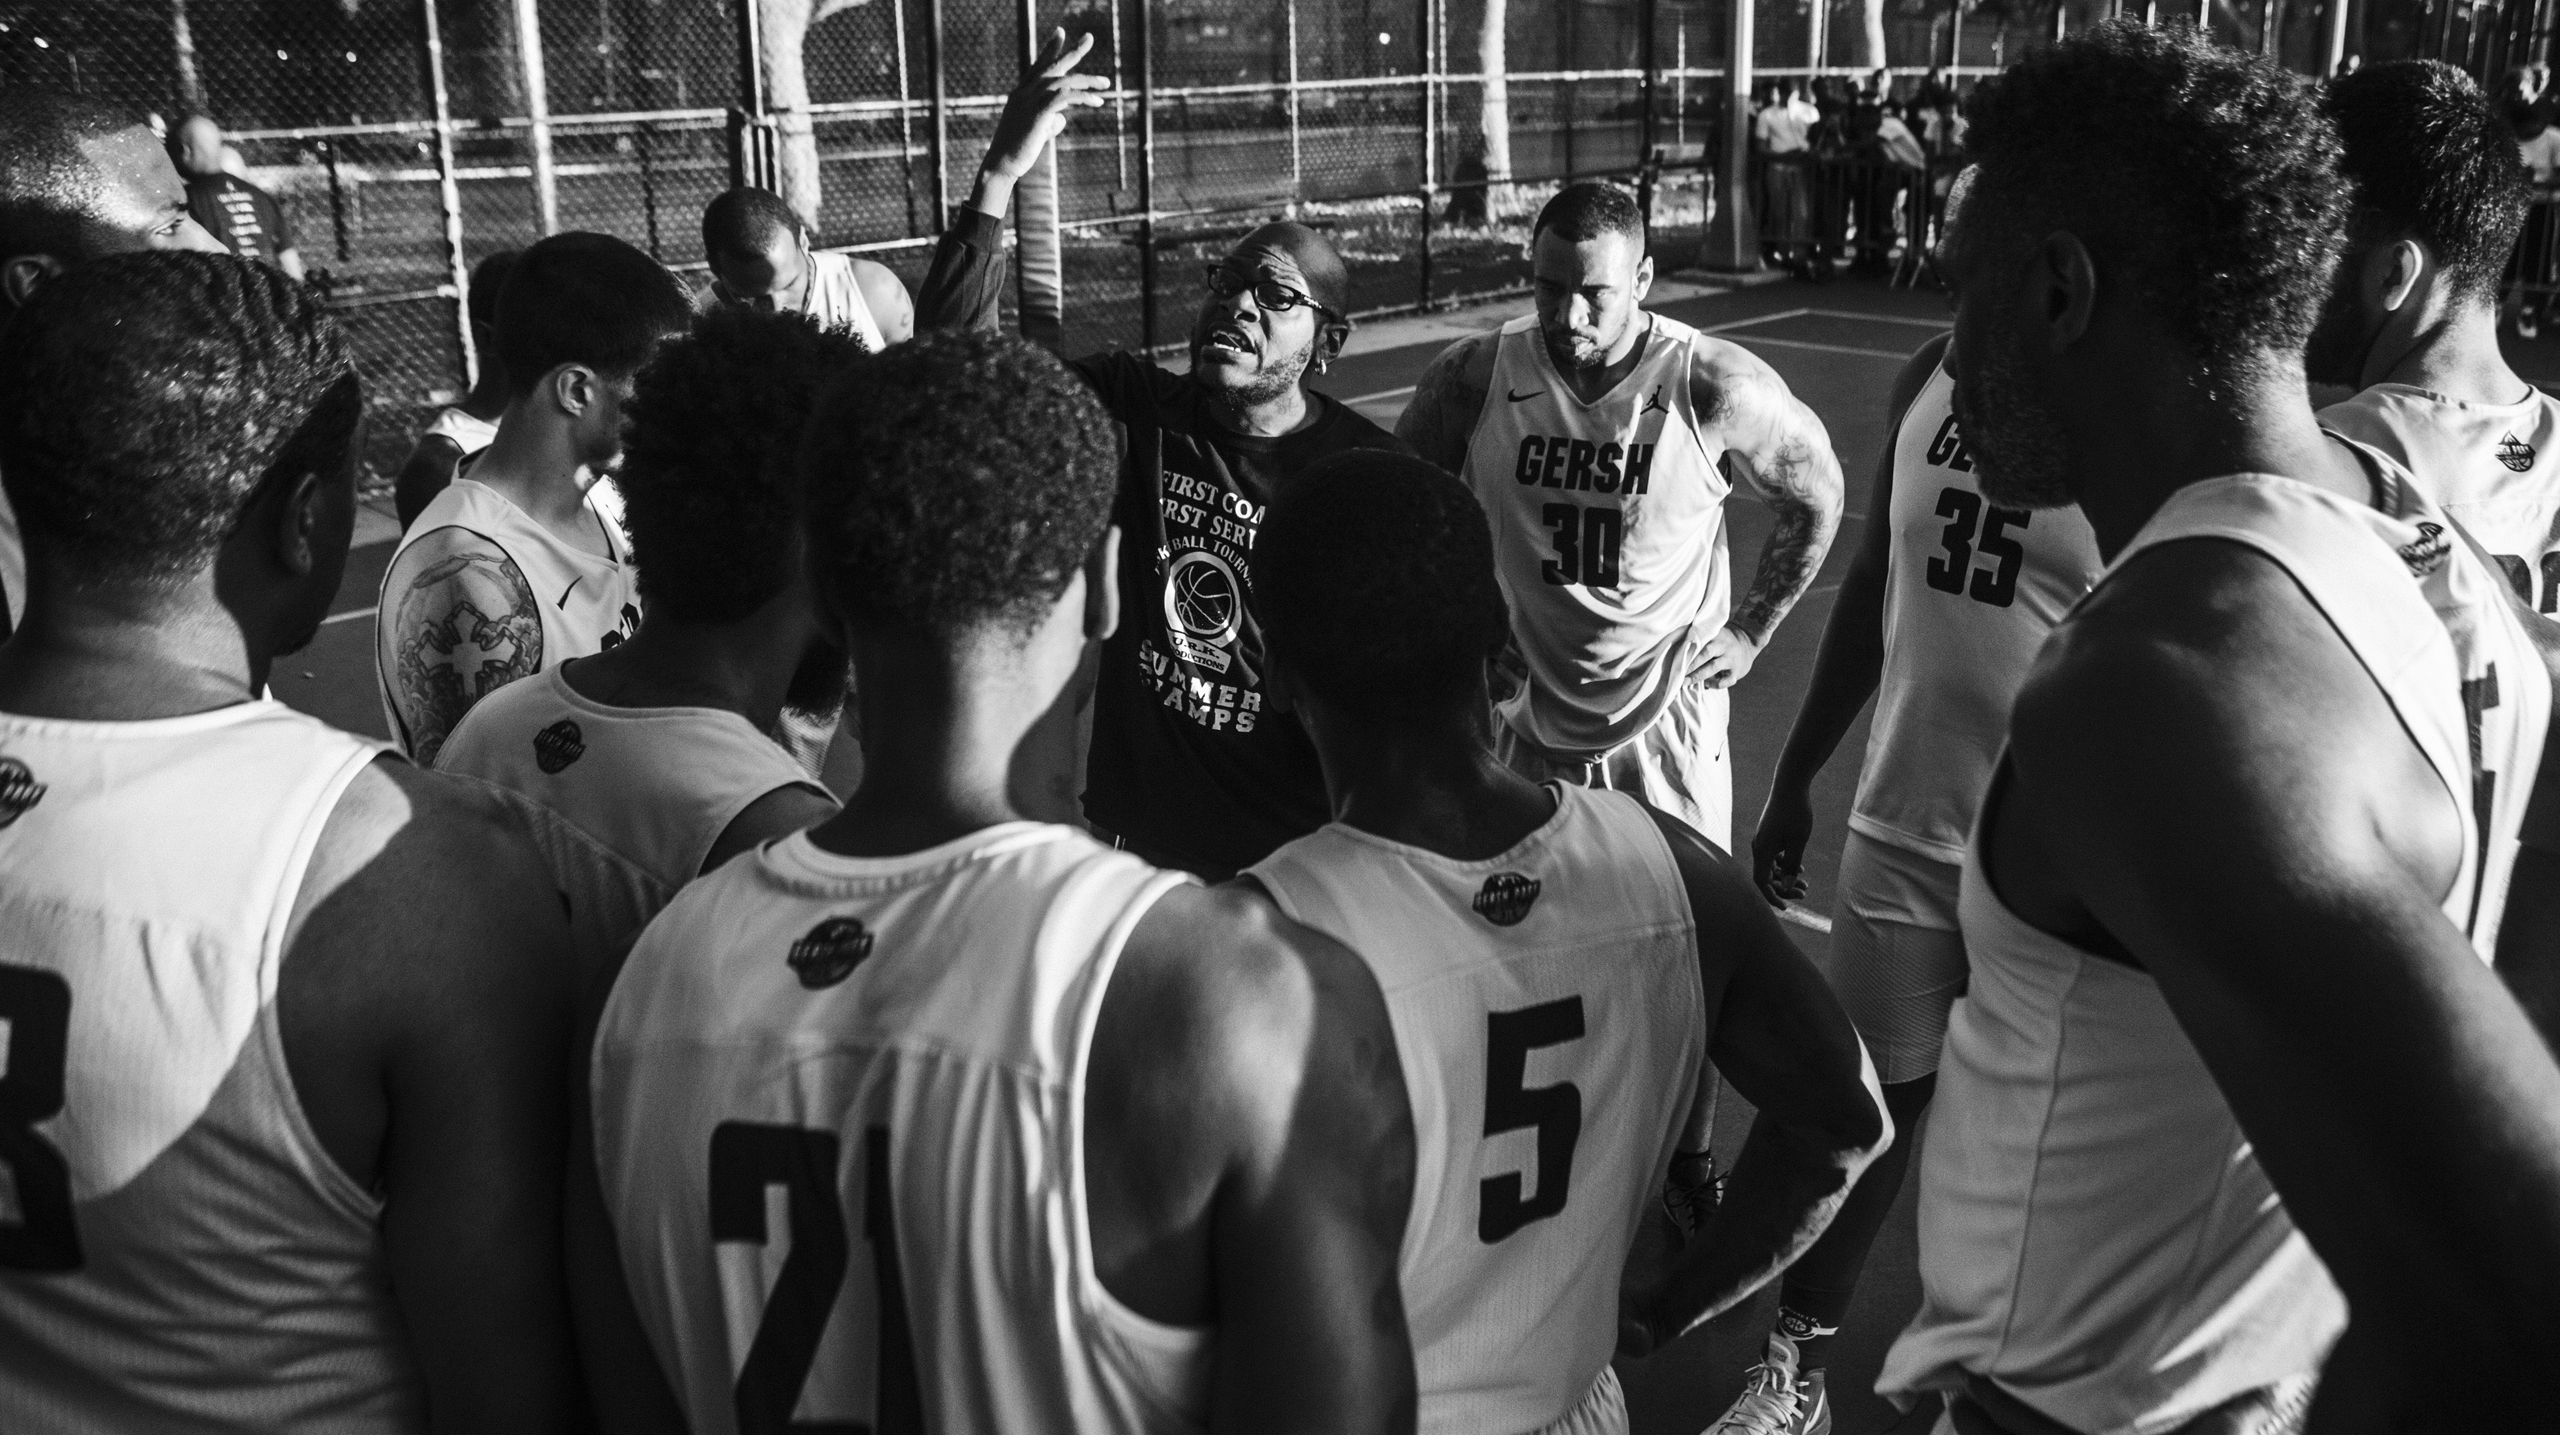 The coaches for both high school and Pro teams in New York City  are very passionate about the game and wanting the players as, mostly, black men to take this sport and succeed both on and off the court.